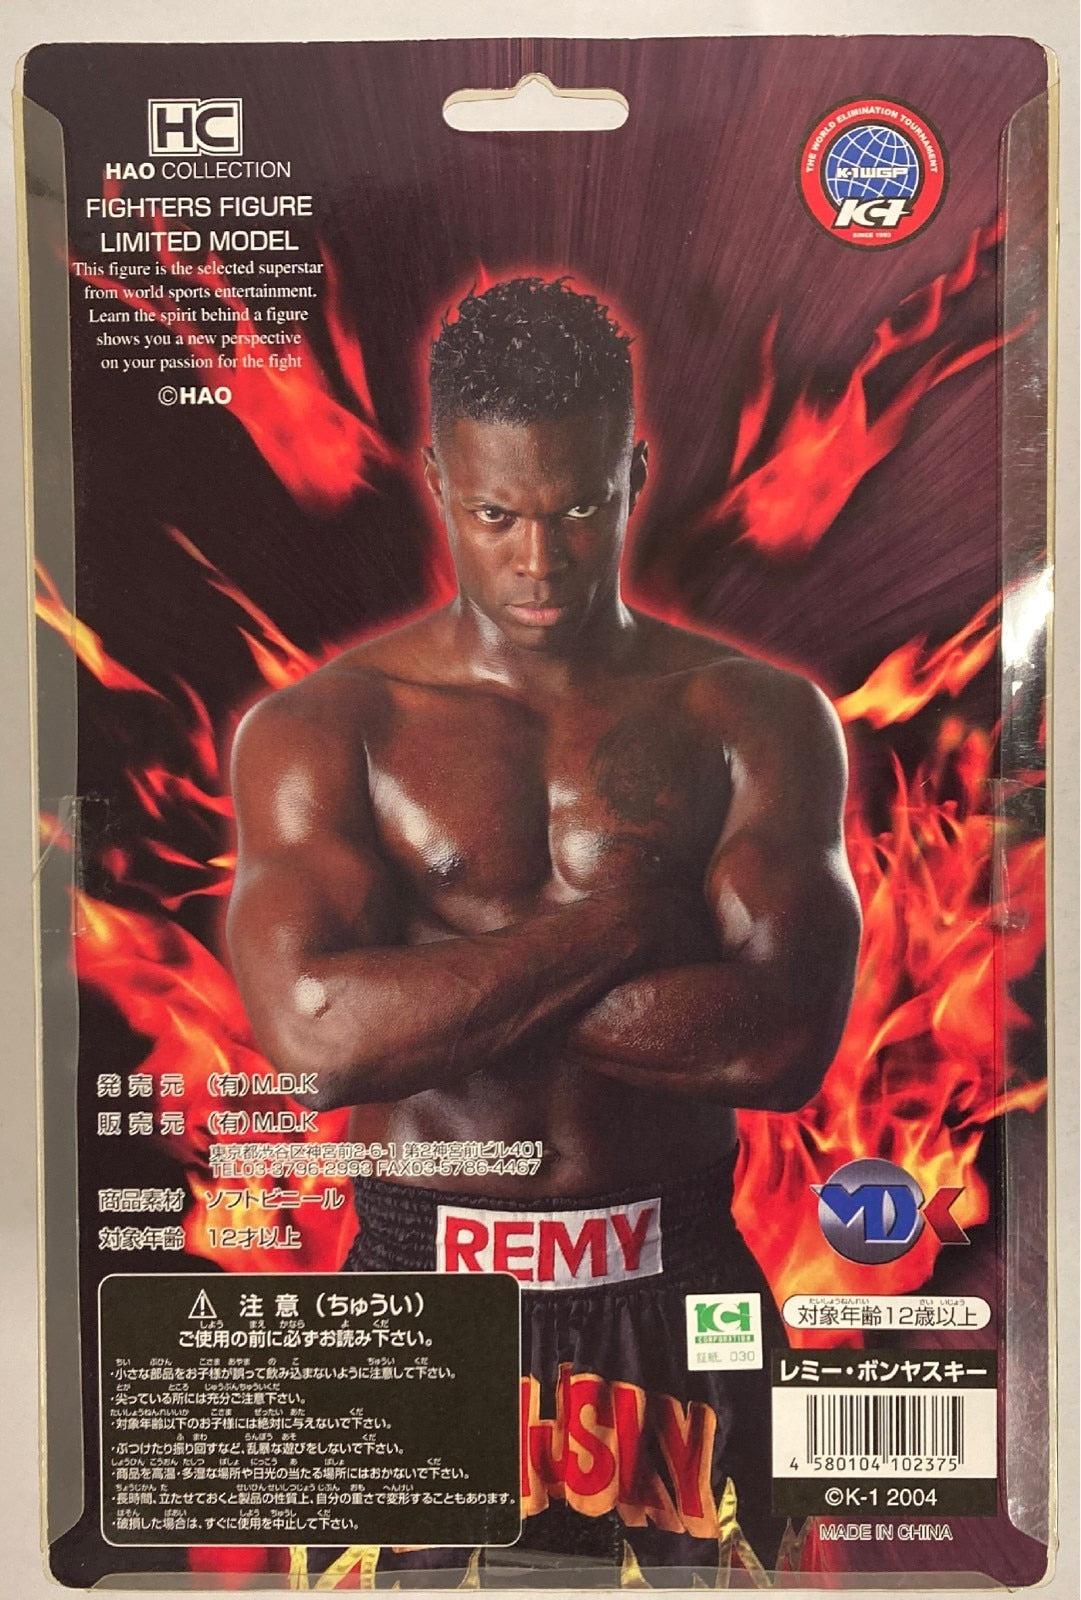 2004 K-1 HAO Collection Fighters Figure Limited Model “The Gentleman” Remy Bonjasky